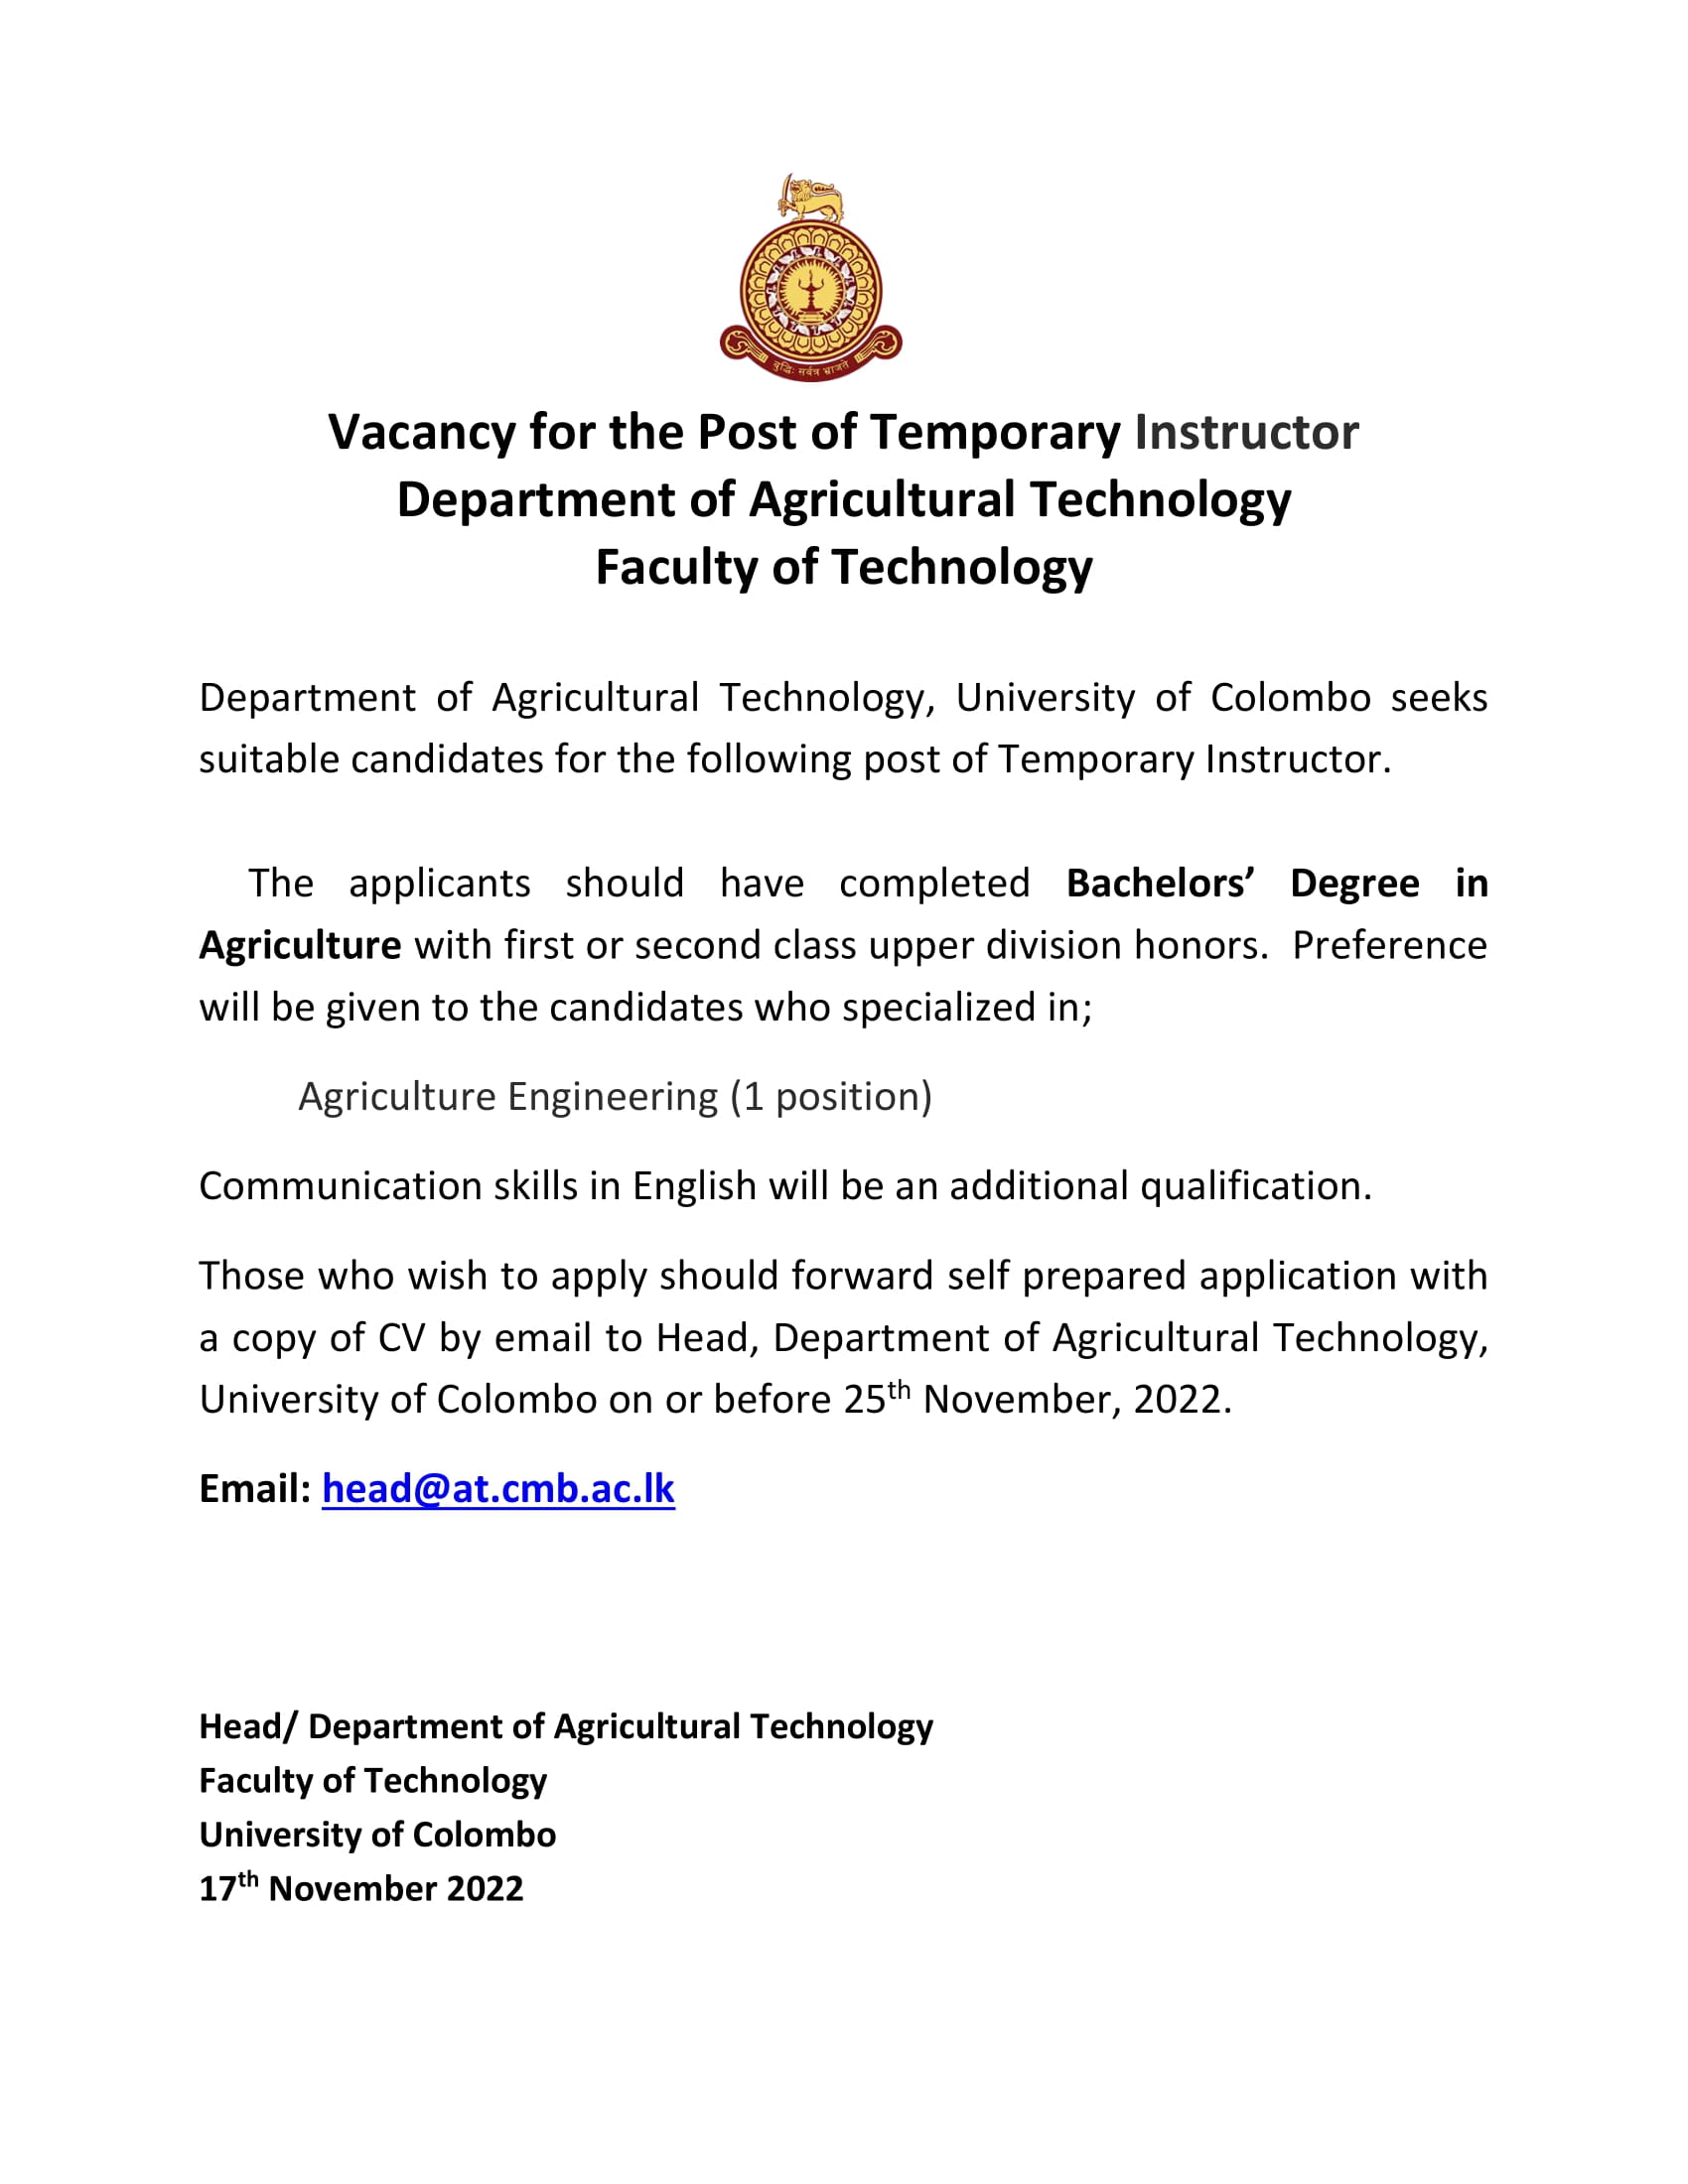 Vacancy for the Post of Temporary Instructor (Department of Agricultural Technology)